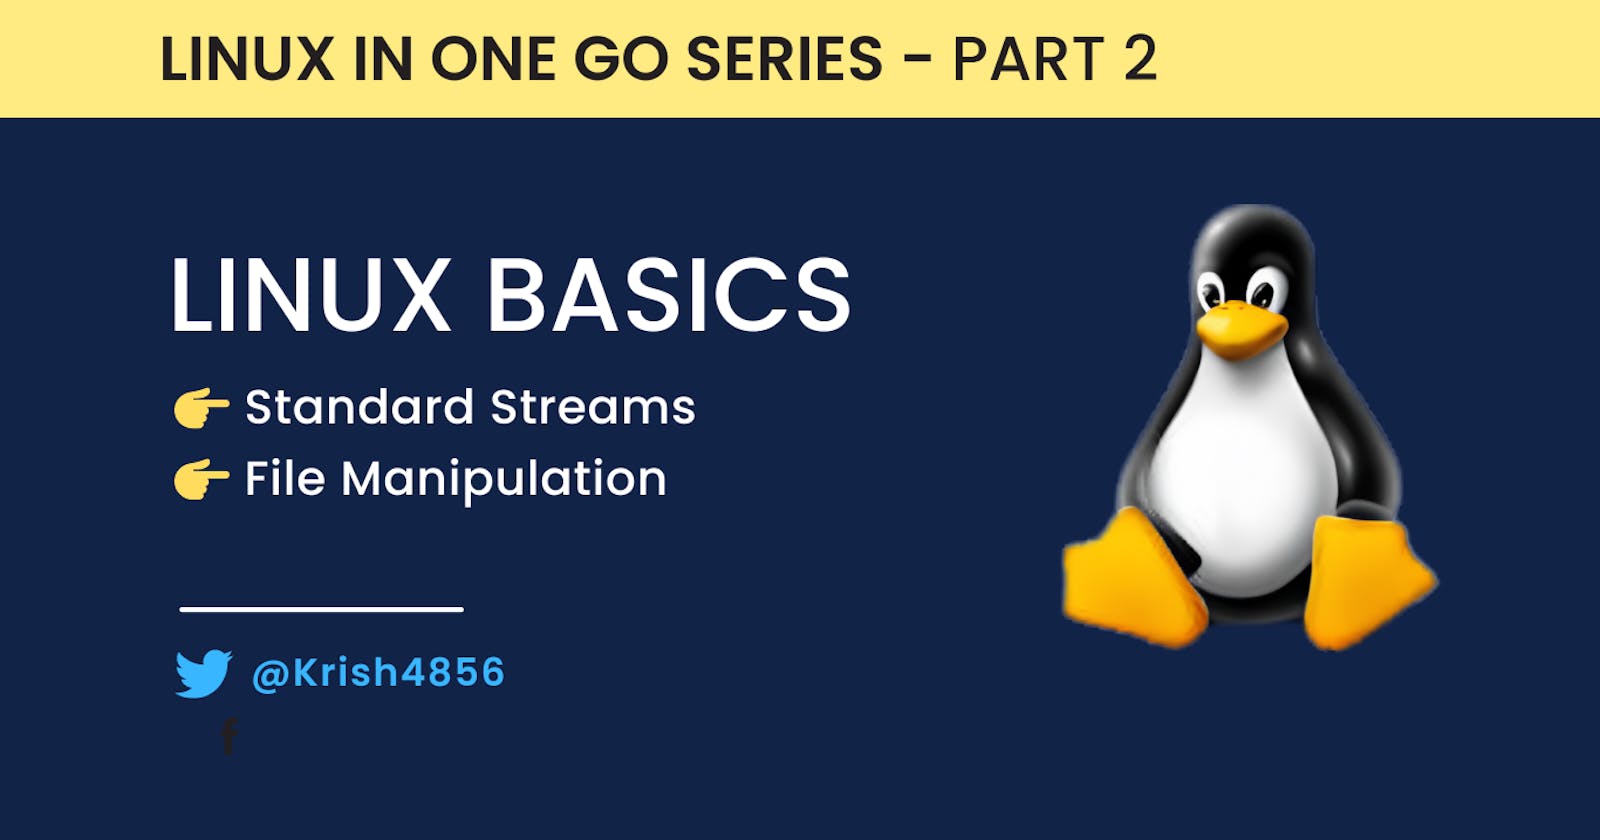 Learn Standard Linux Streams and File Manipulation